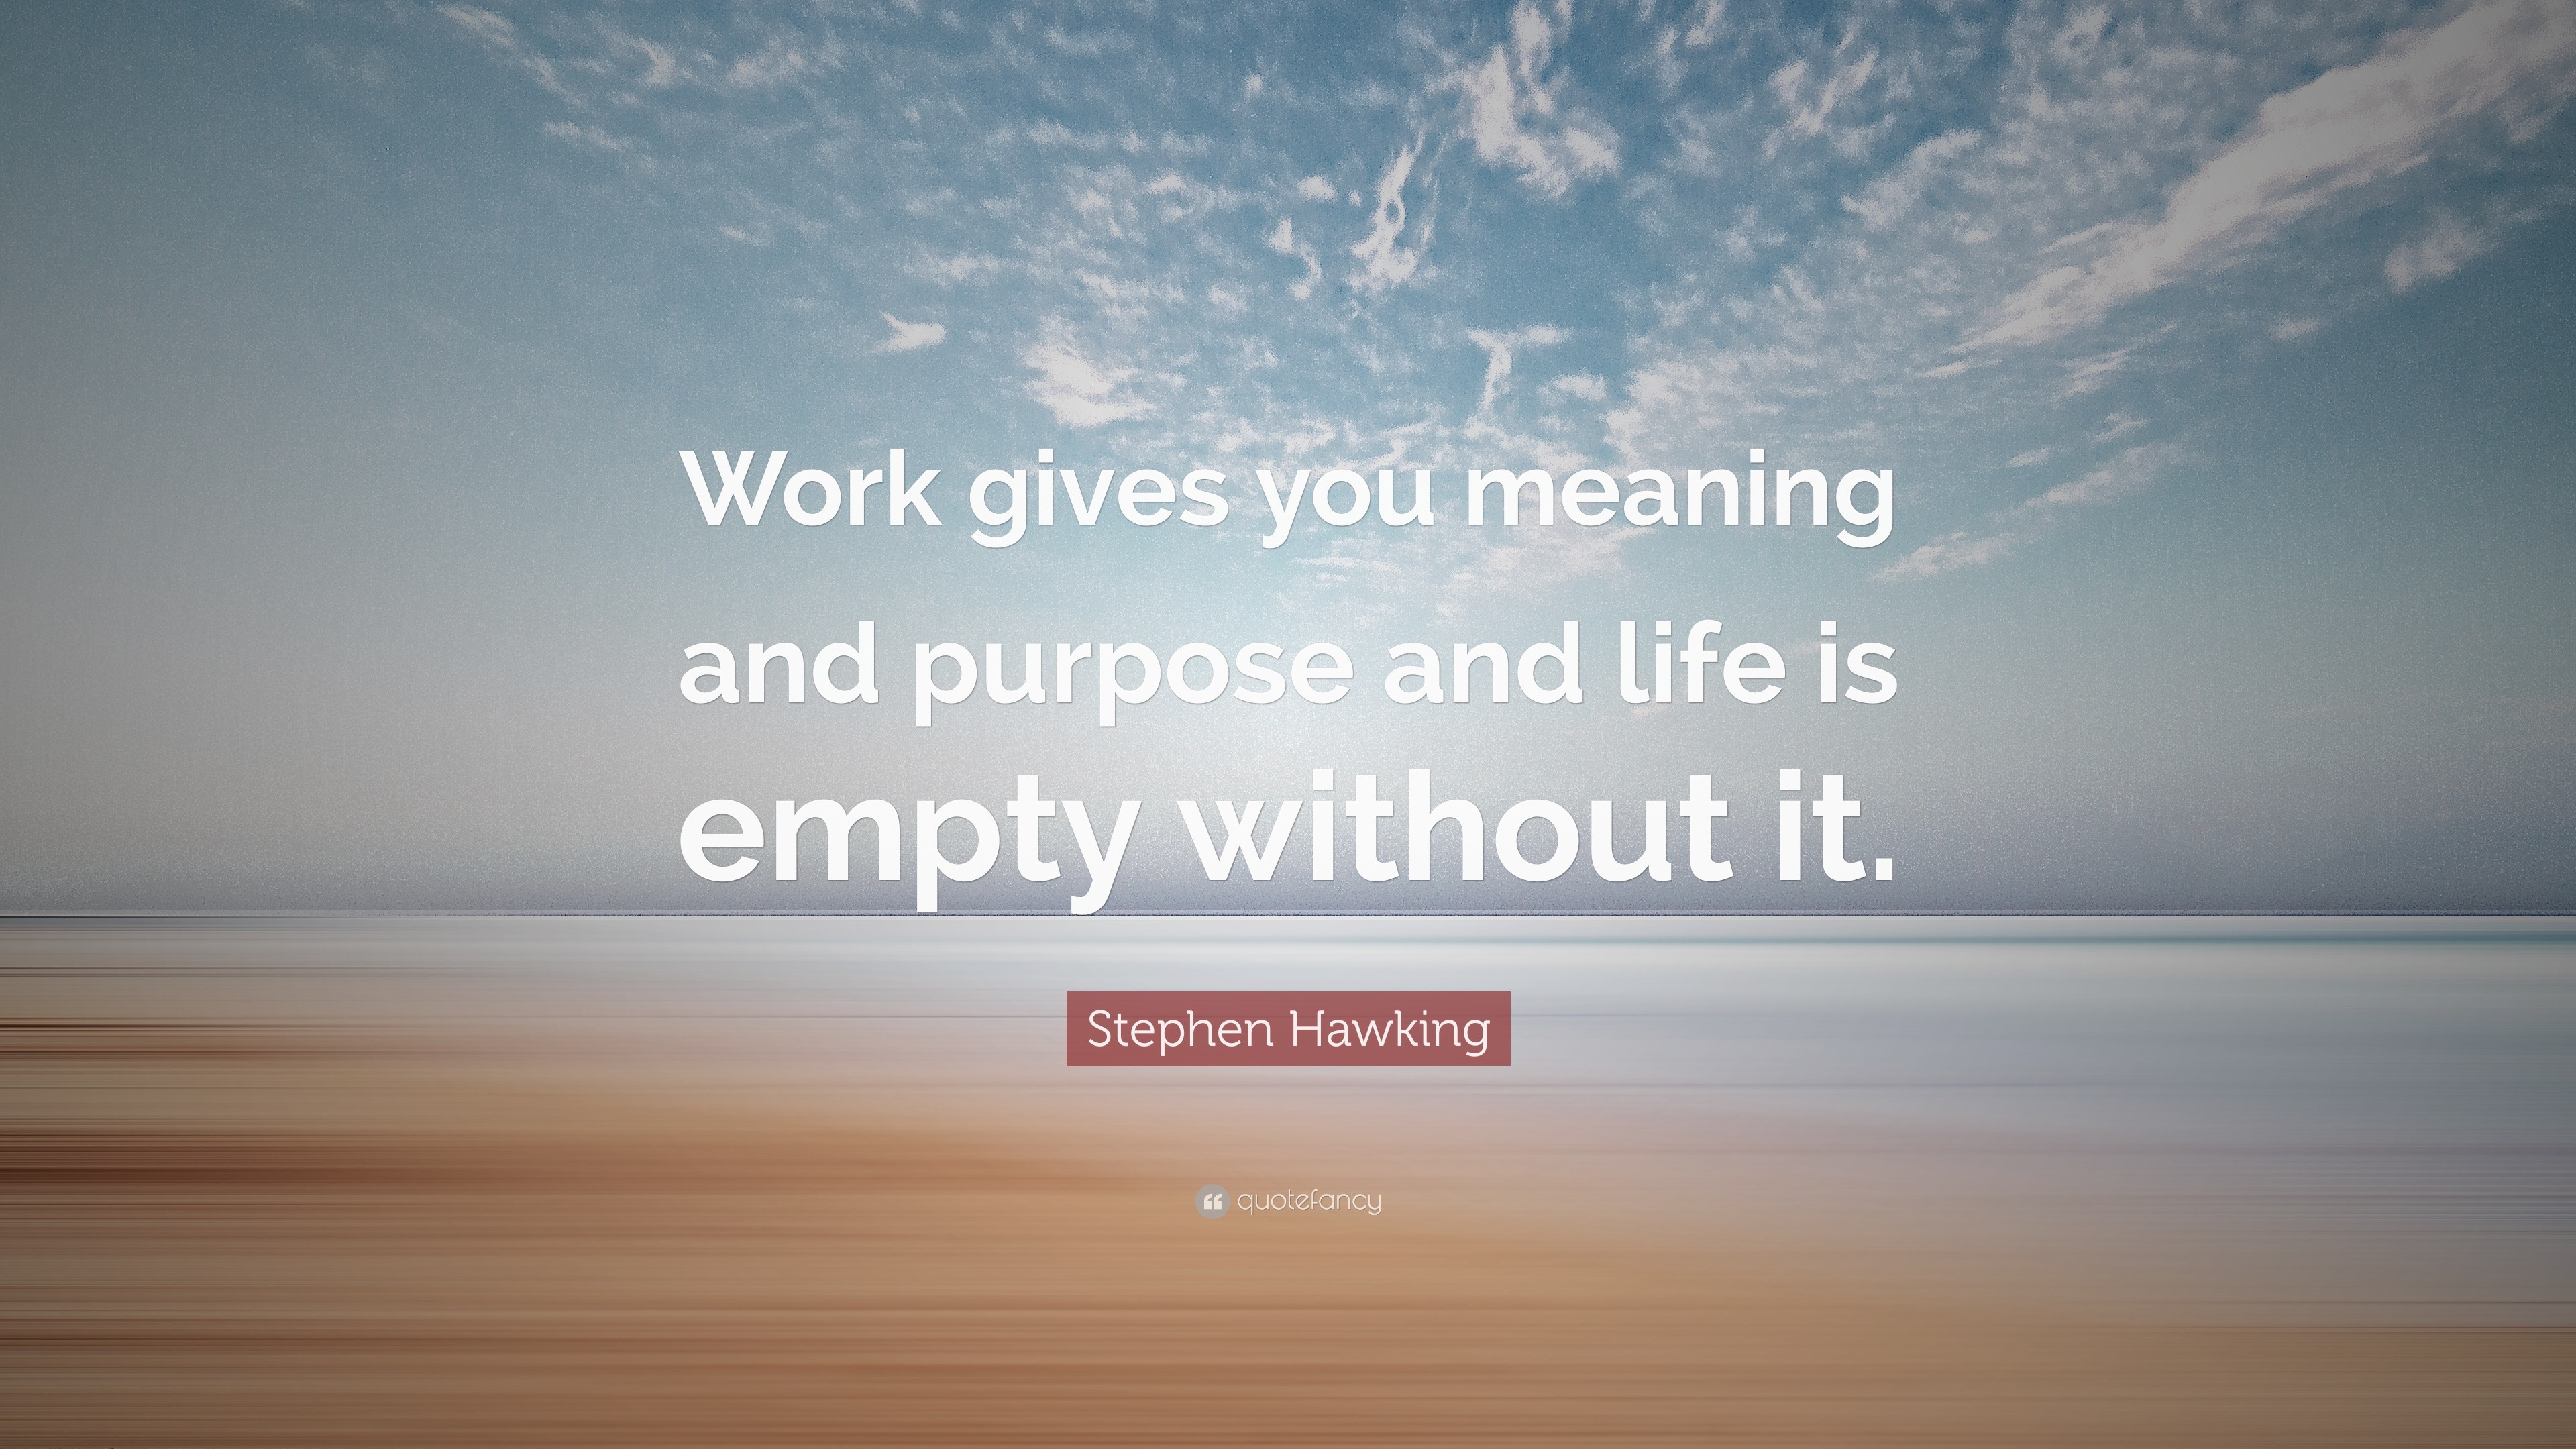 Stephen Hawking Quote: "Work gives you meaning and purpose ...